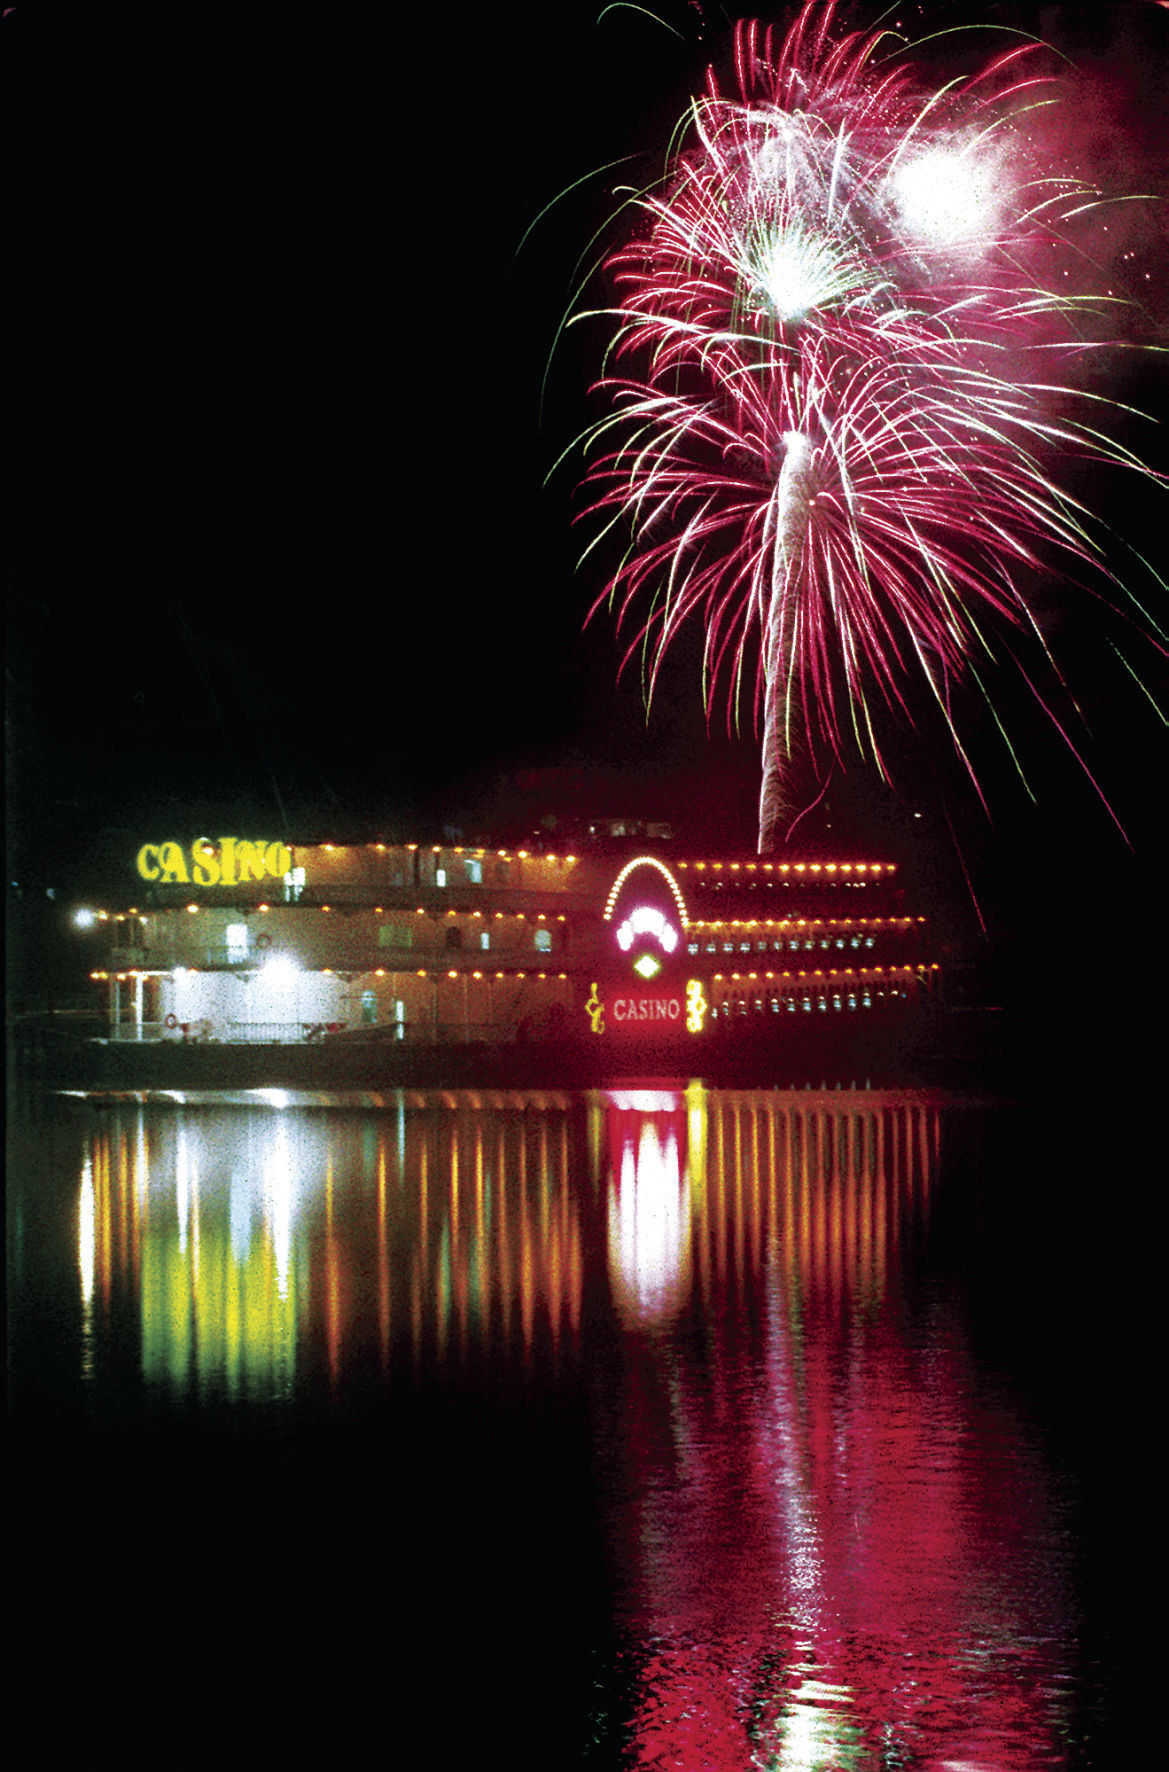 Fireworks sparkle above the new Diamond Jo Casino in Dubuque’s Ice Harbor in 1995.    PHOTO CREDIT: Dave Kettering, Telegraph Herald file